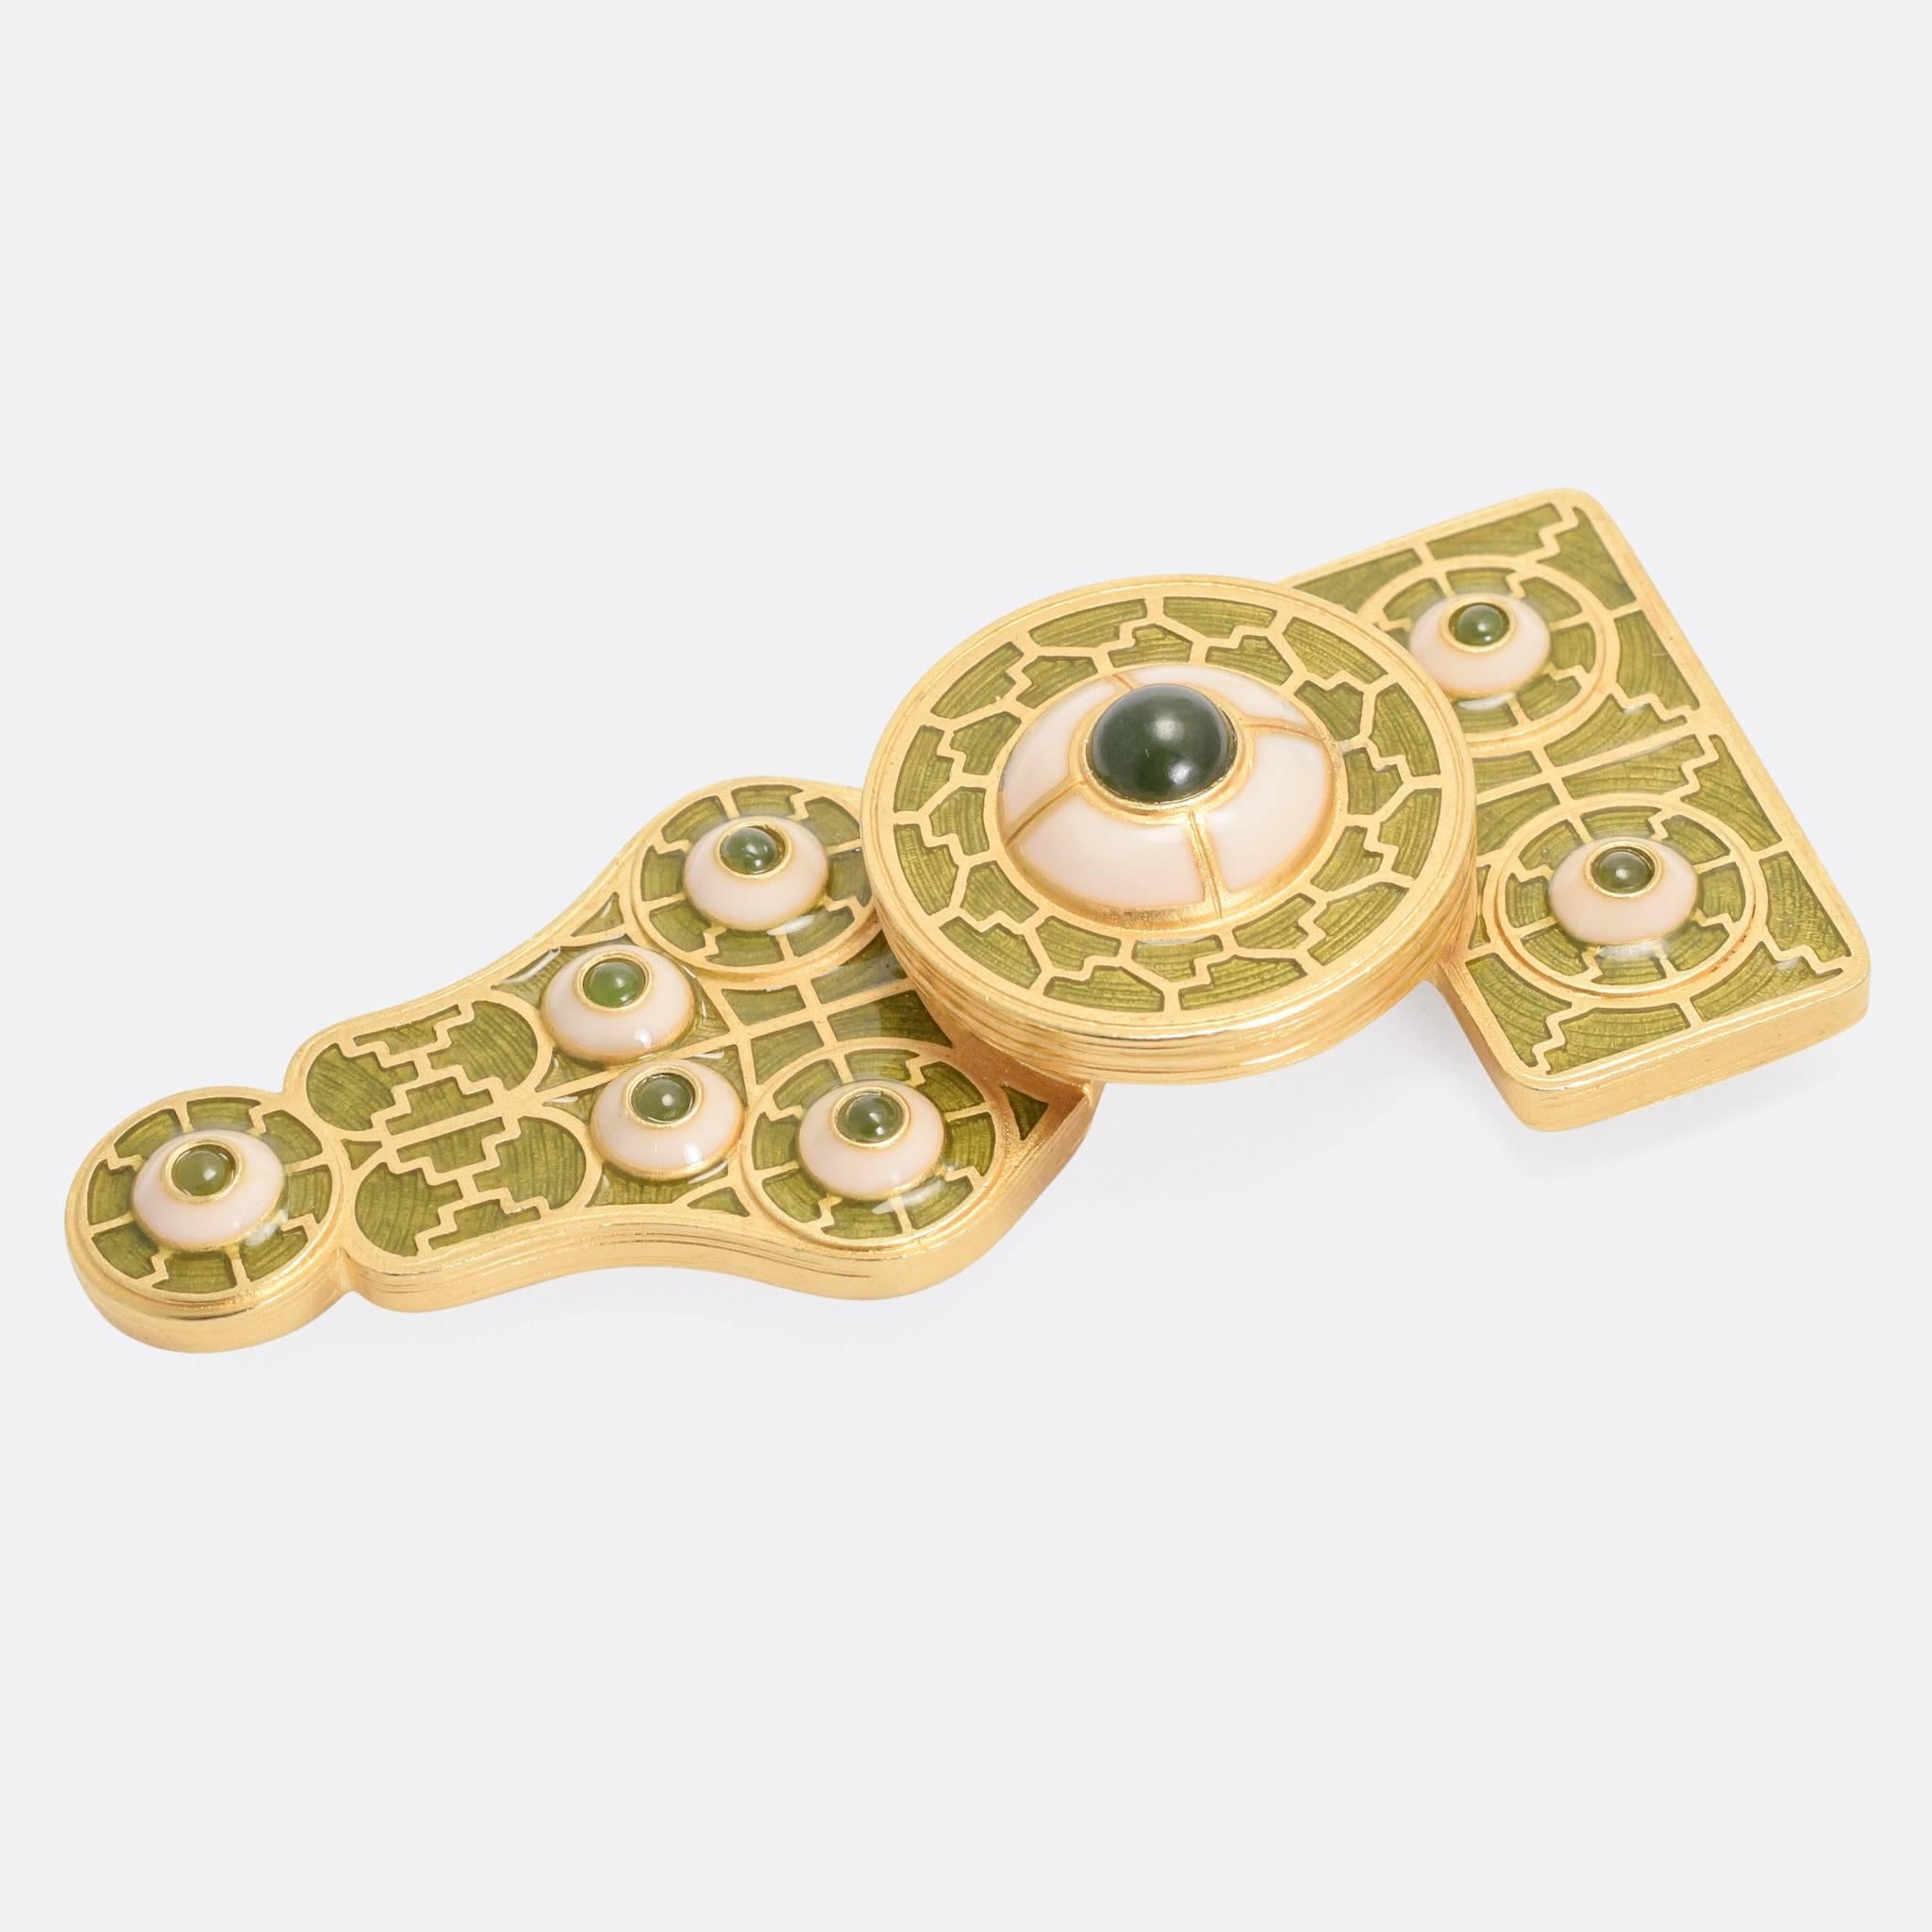 A wonderfully unusual vintage brooch by Liberty of London. The piece is large scale, and modelled as a stylized form of the Anglo-Saxon Great Square Headed Brooch, with Frankish style enamel inlays. The overall aesthetic of the piece is clearly